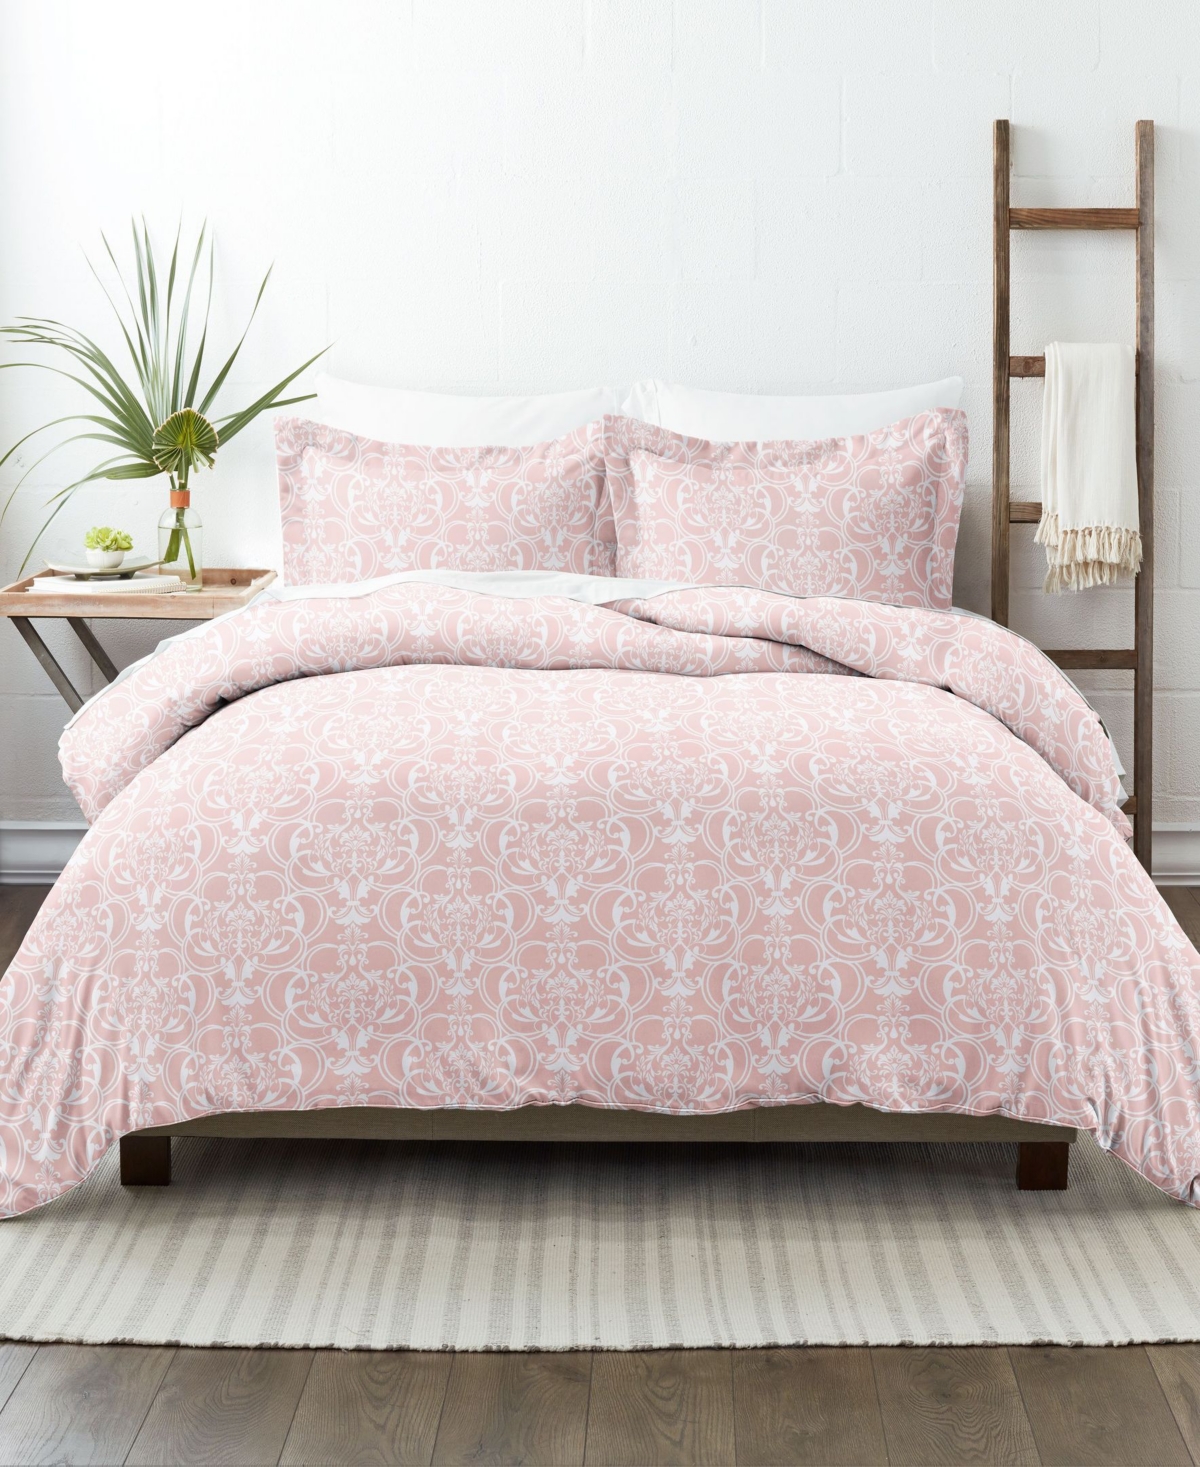 Ienjoy Home Home Collection Premium Ultra Soft 3 Piece Reversible Duvet Cover Set, King/california King In Pink Romantic Damask